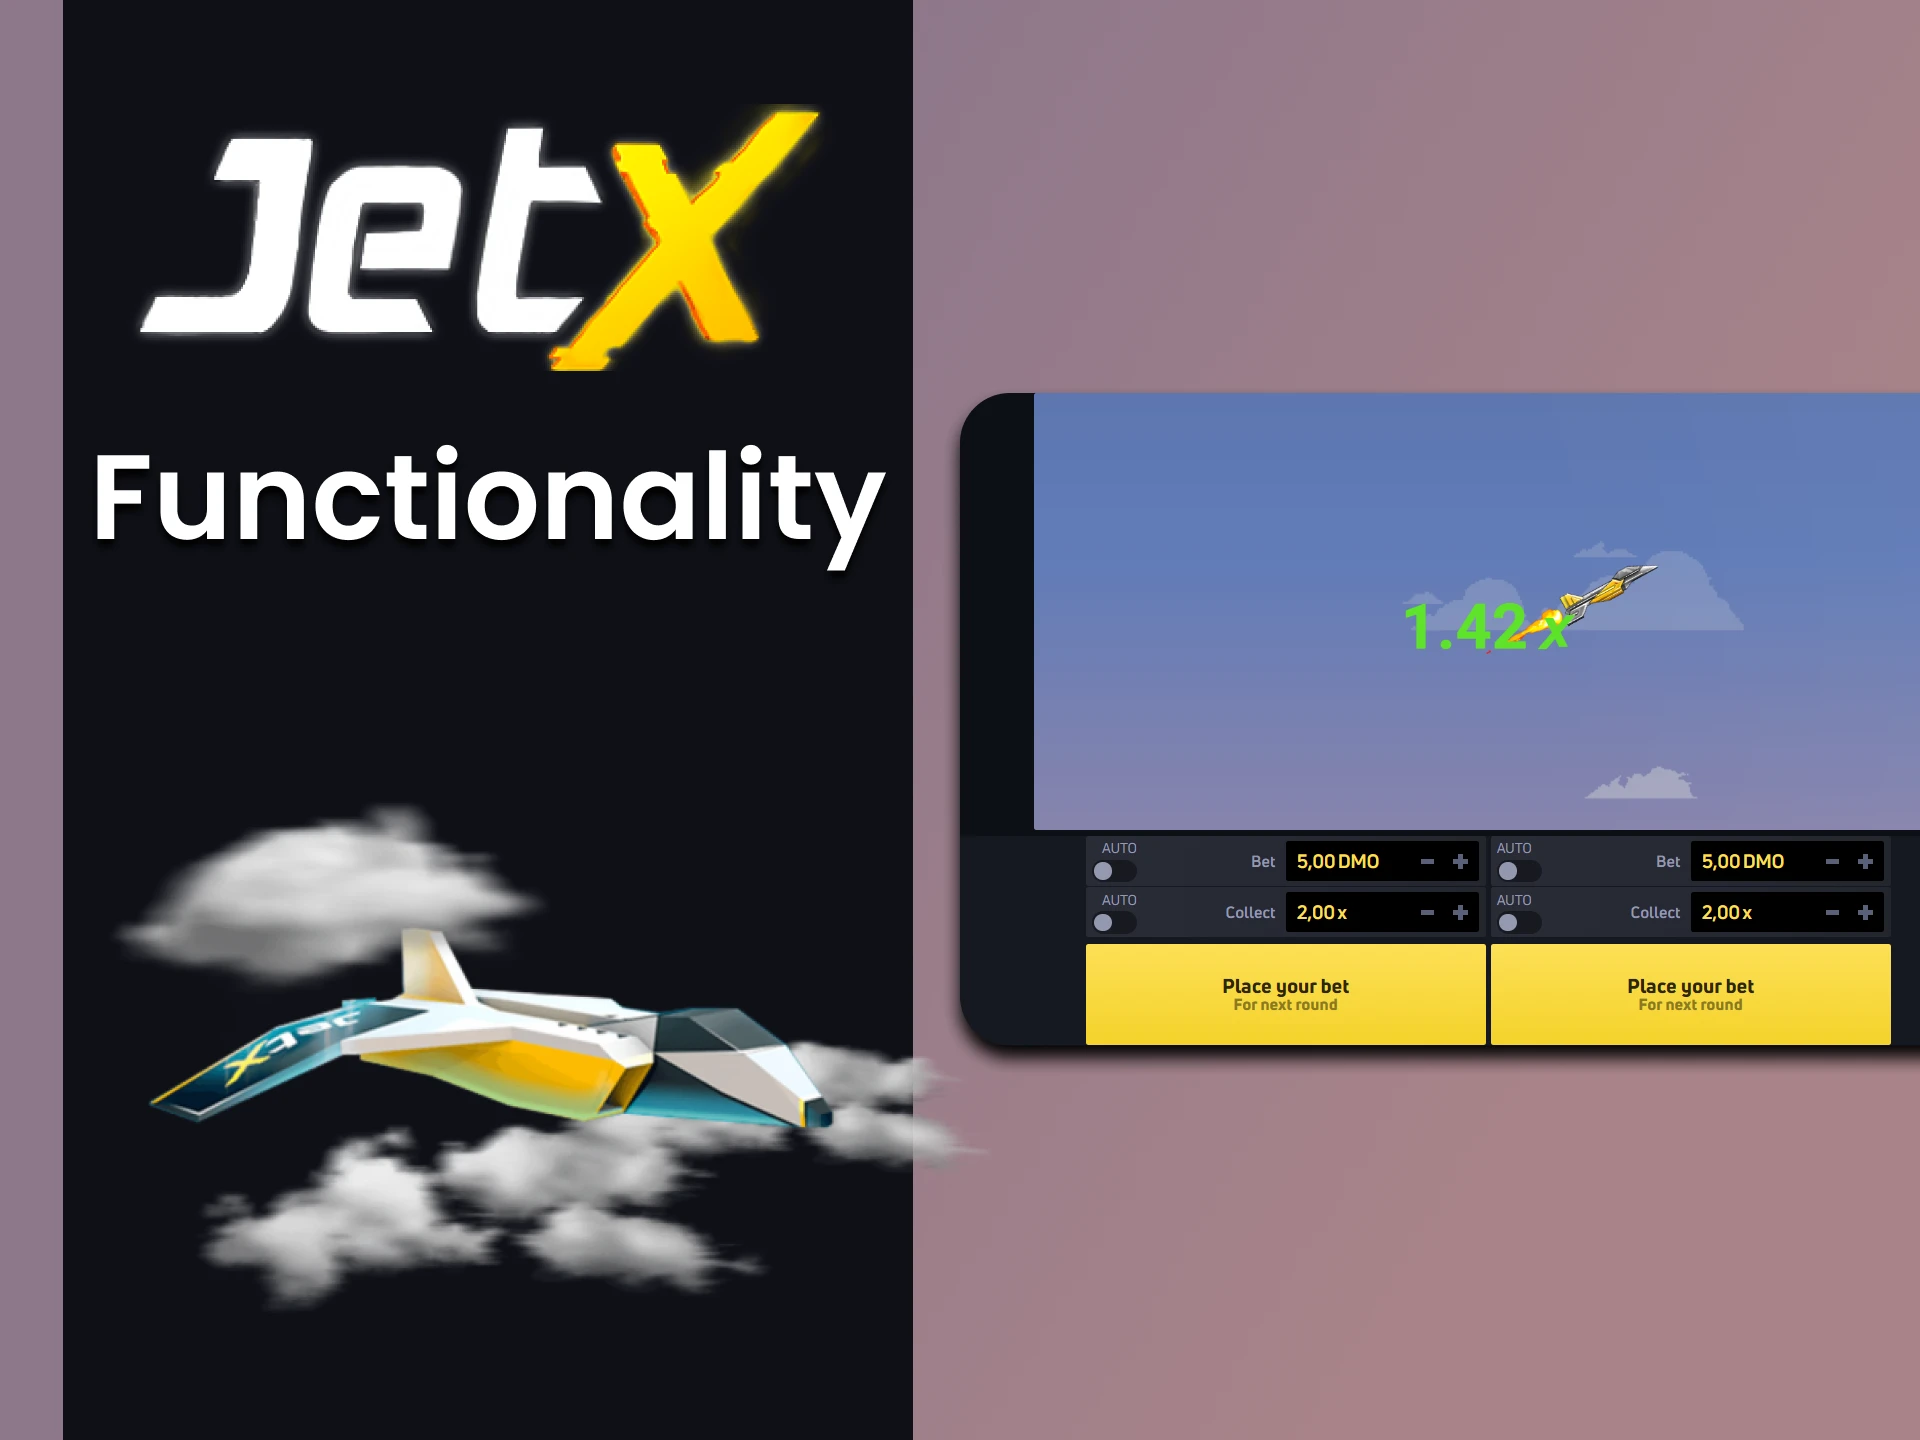 We will tell you how the demo version of the JetX game works.